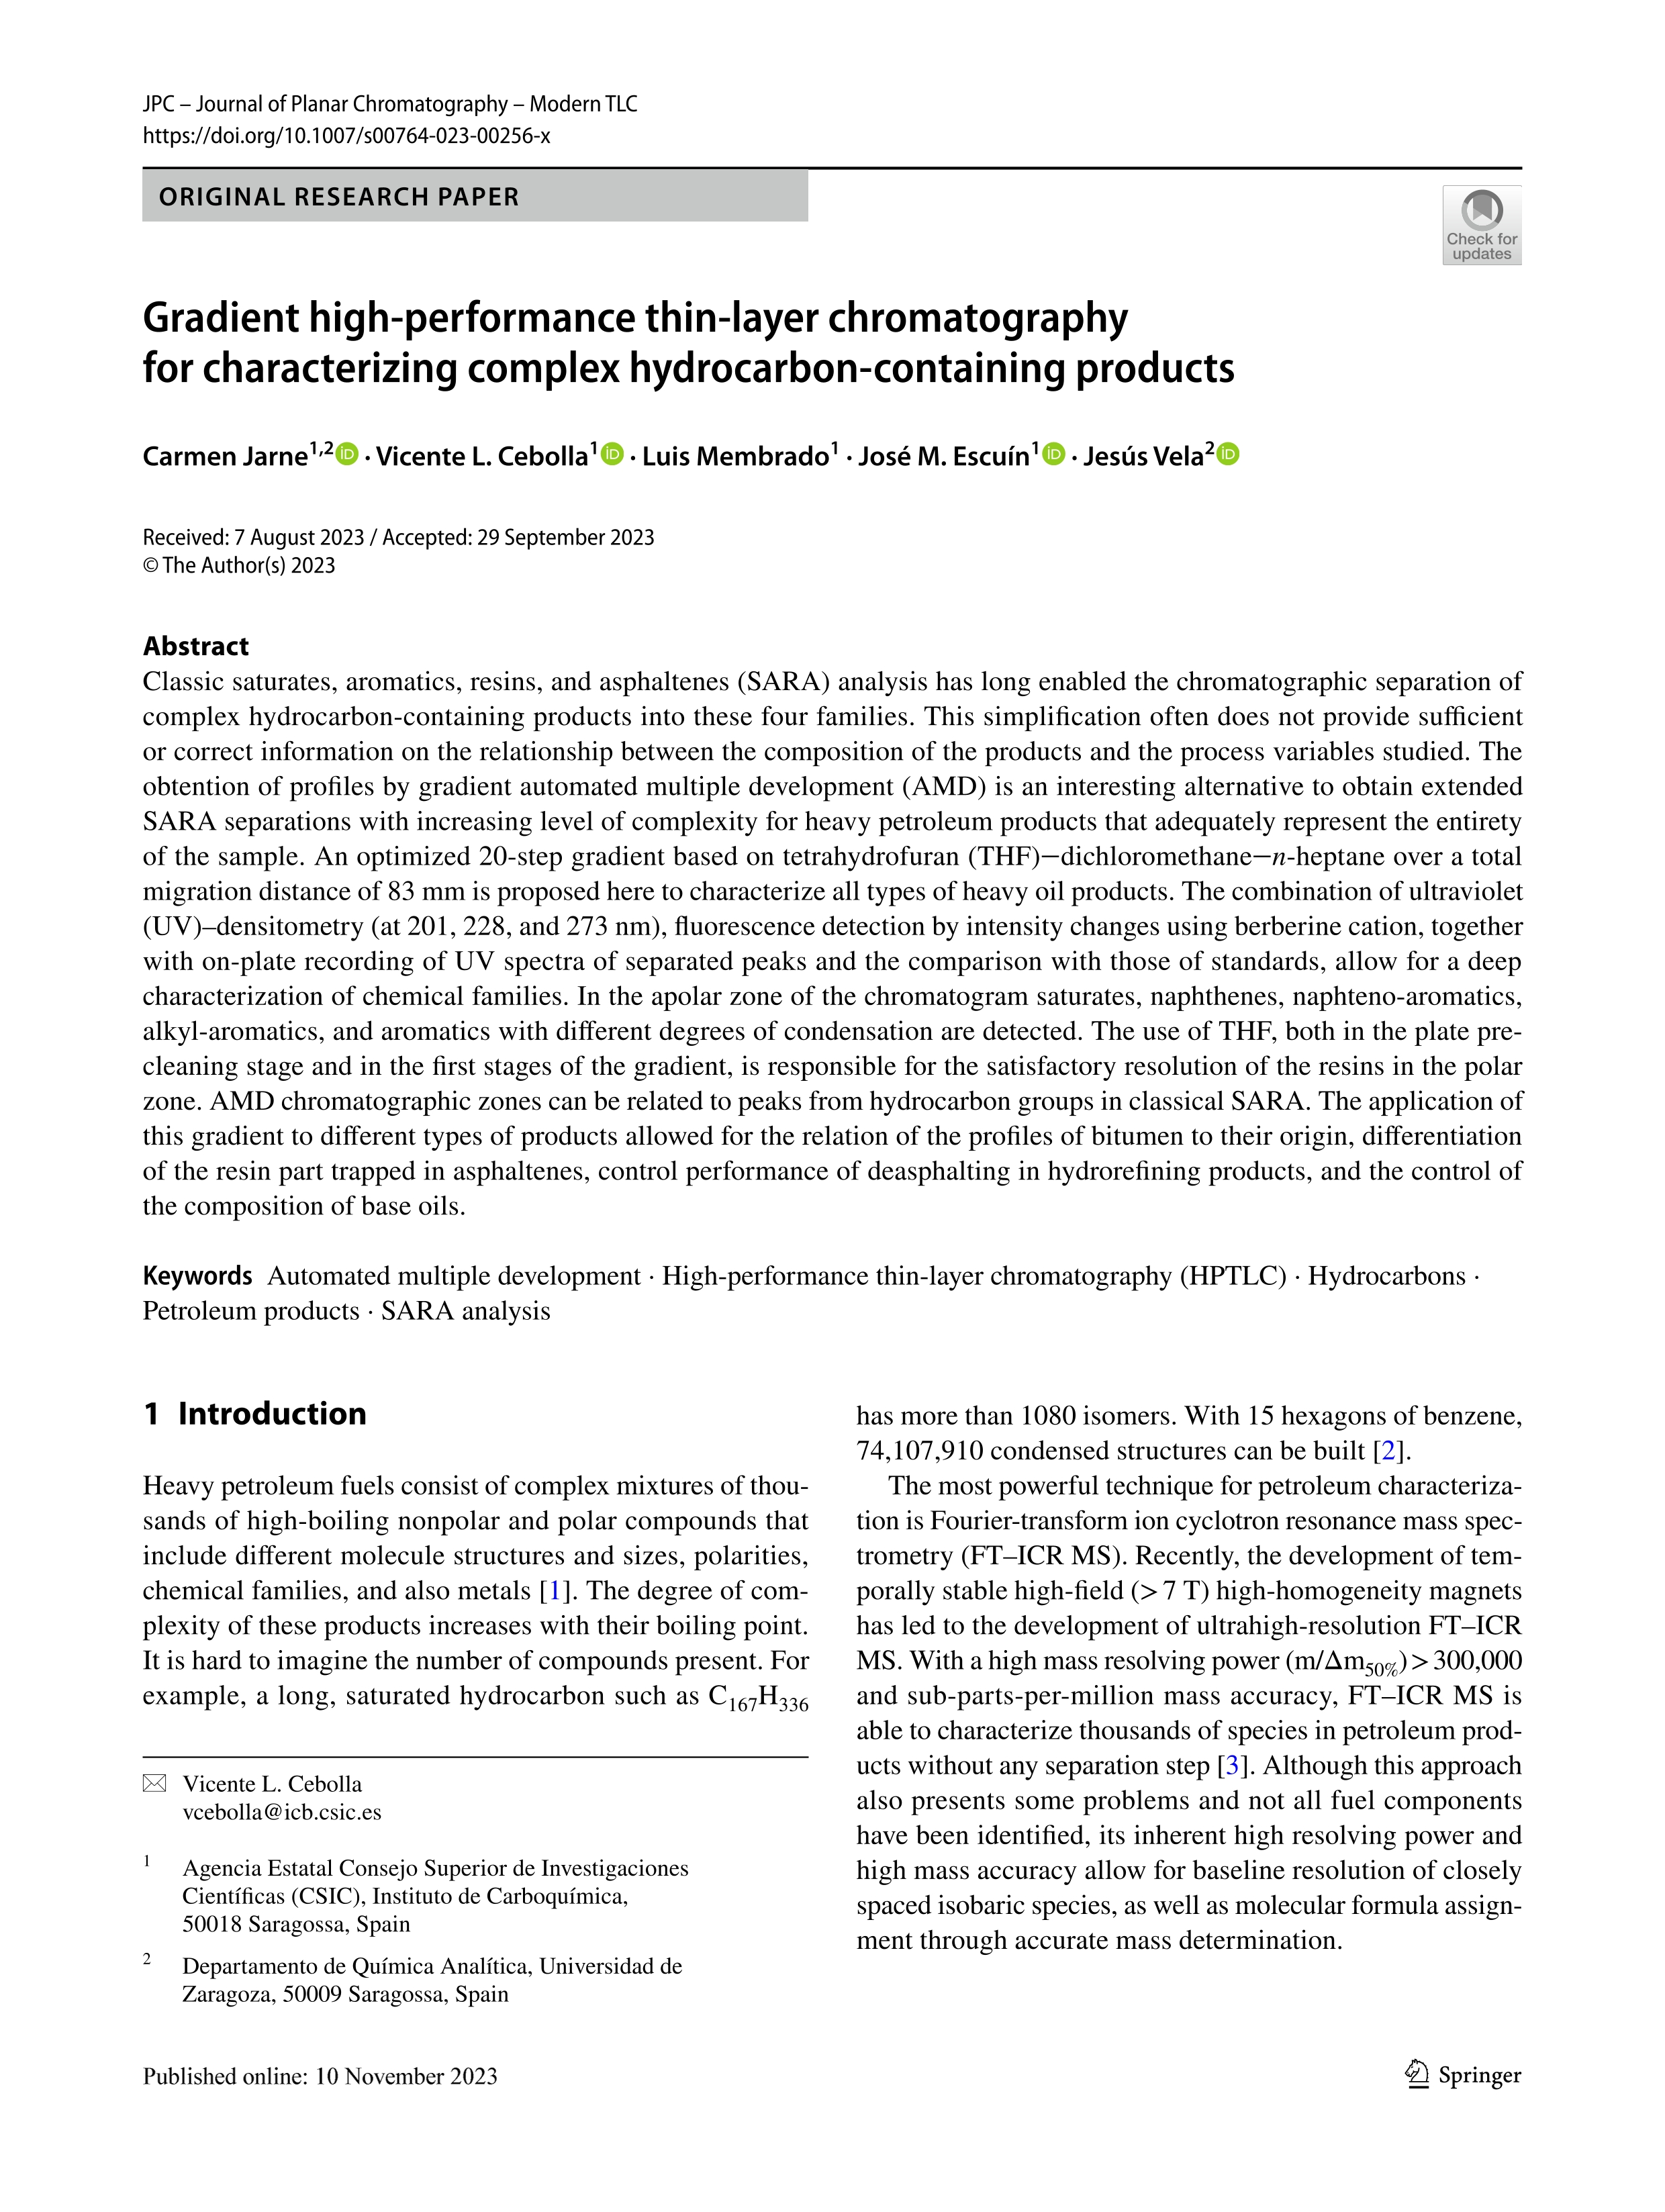 Gradient high-performance thin-layer chromatography for characterizing complex hydrocarbon-containing products